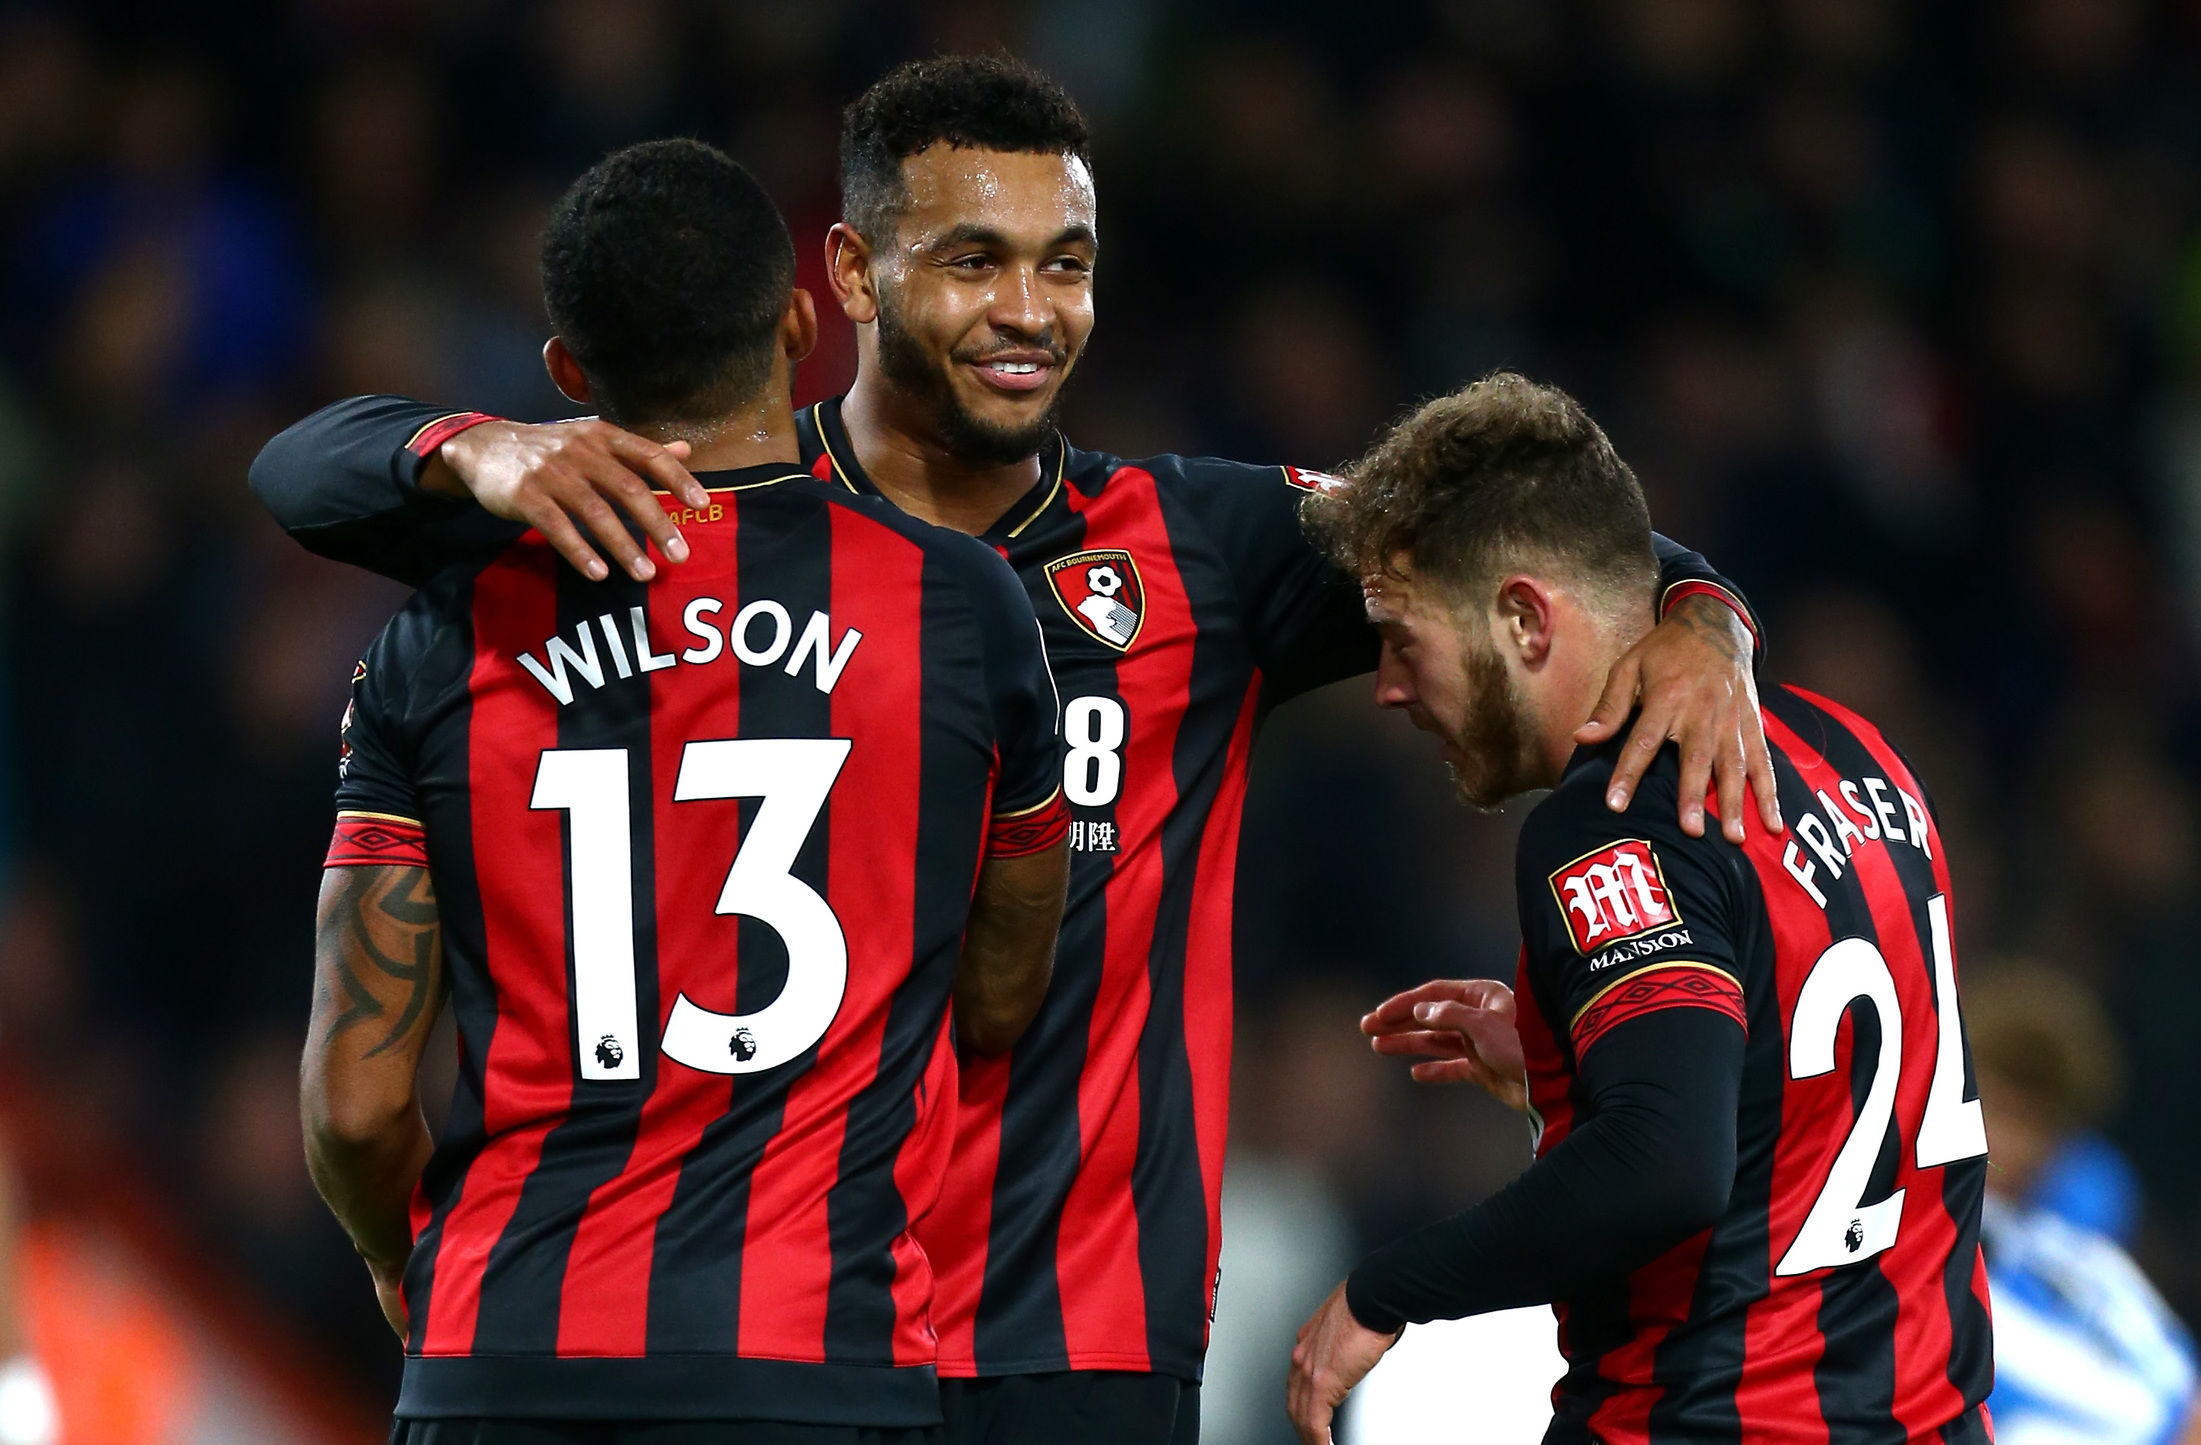 Bournemouth 2018/19 Review: End of Season Report Card for the Cherries ...